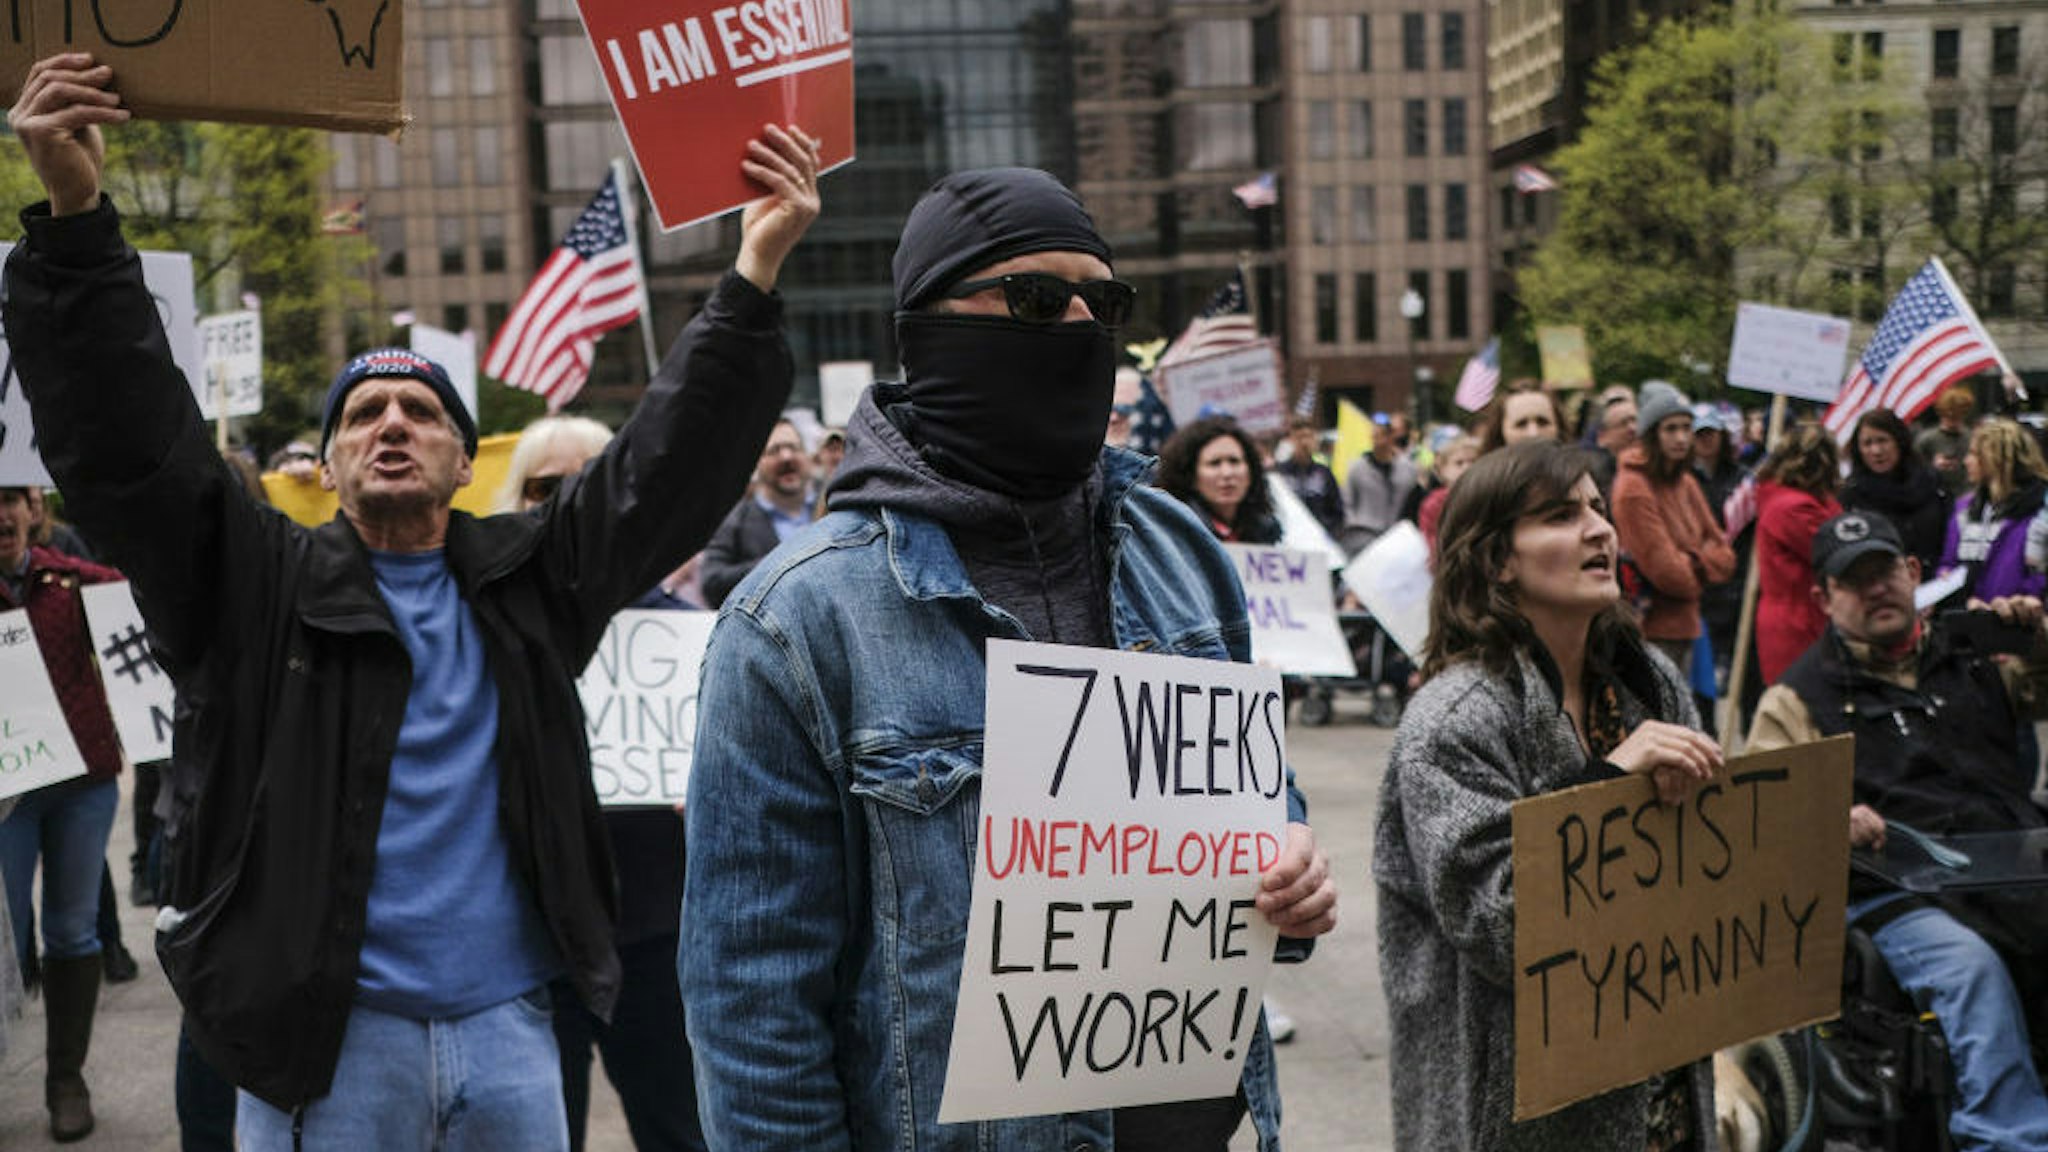 Demonstrators hold signs outside of the Ohio Statehouse in Columbus, Ohio, U.S., on Friday, May 1, 2020. Protesters gathered at the State Capitol Friday to call for the reopening of the state amid the coronavirus pandemic. Photographer: Matthew Hatcher/Bloomberg